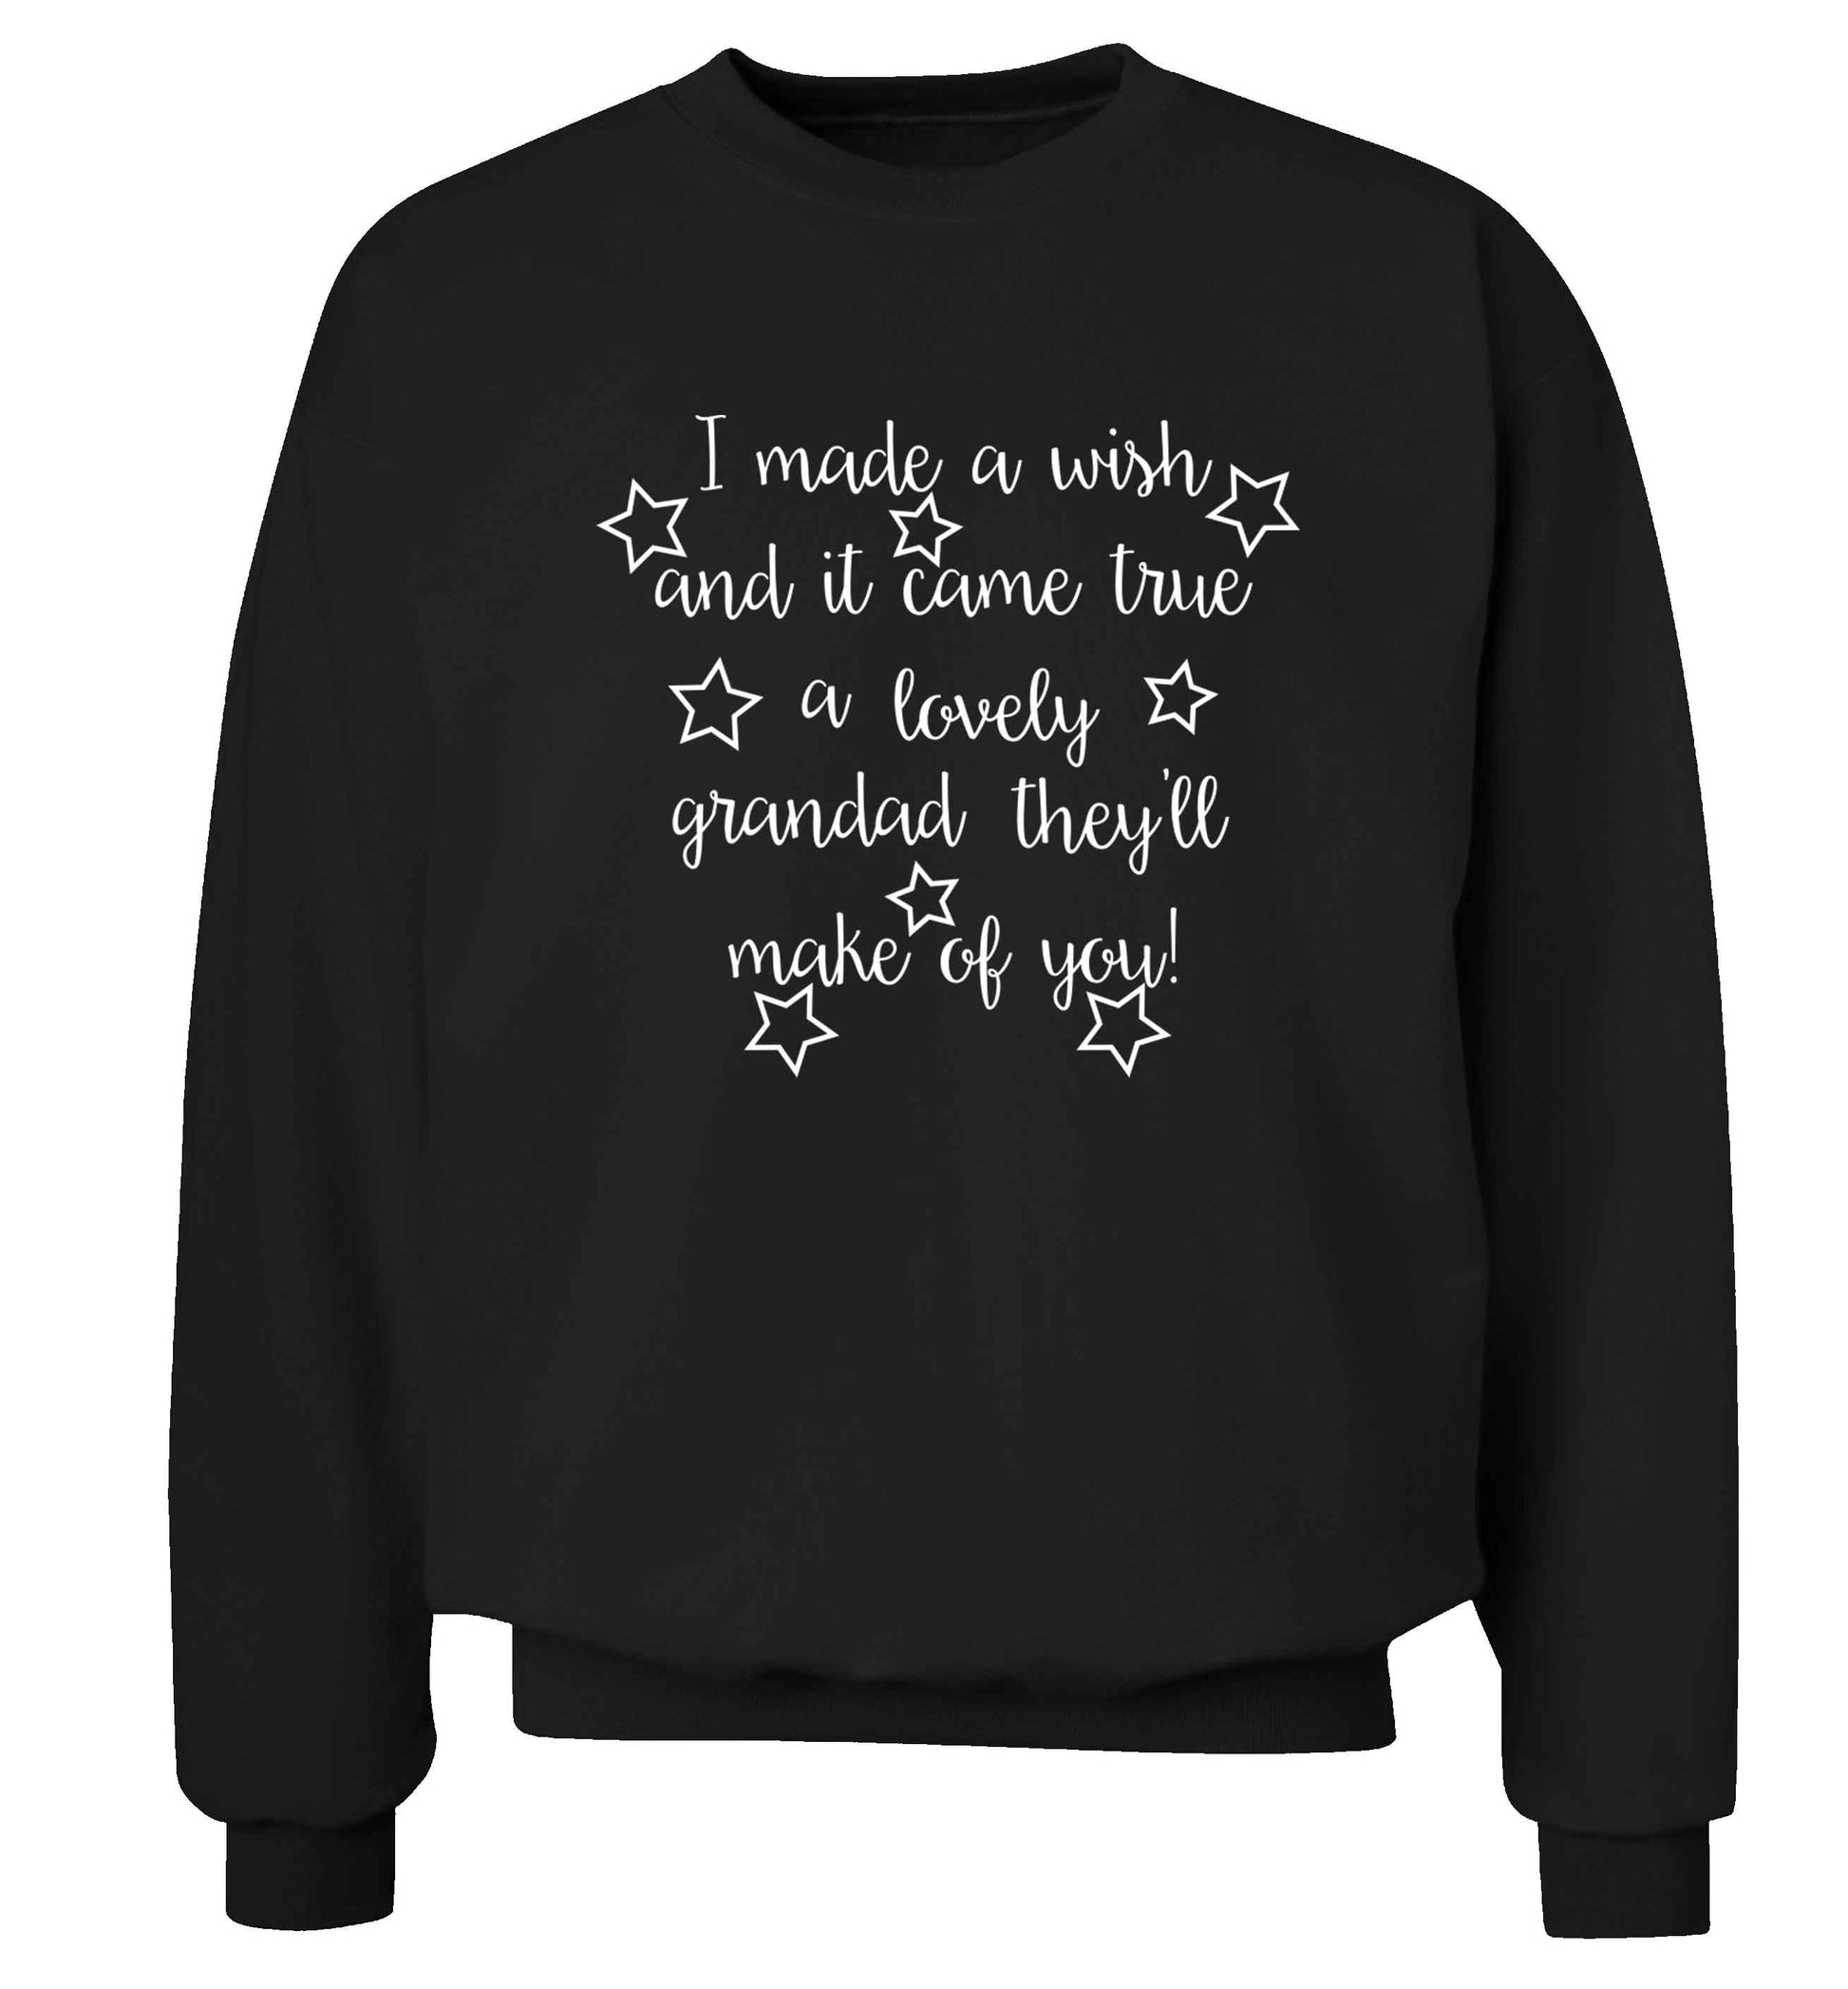 I made a wish and it came true a lovely grandad they'll make of you! Adult's unisex black Sweater 2XL